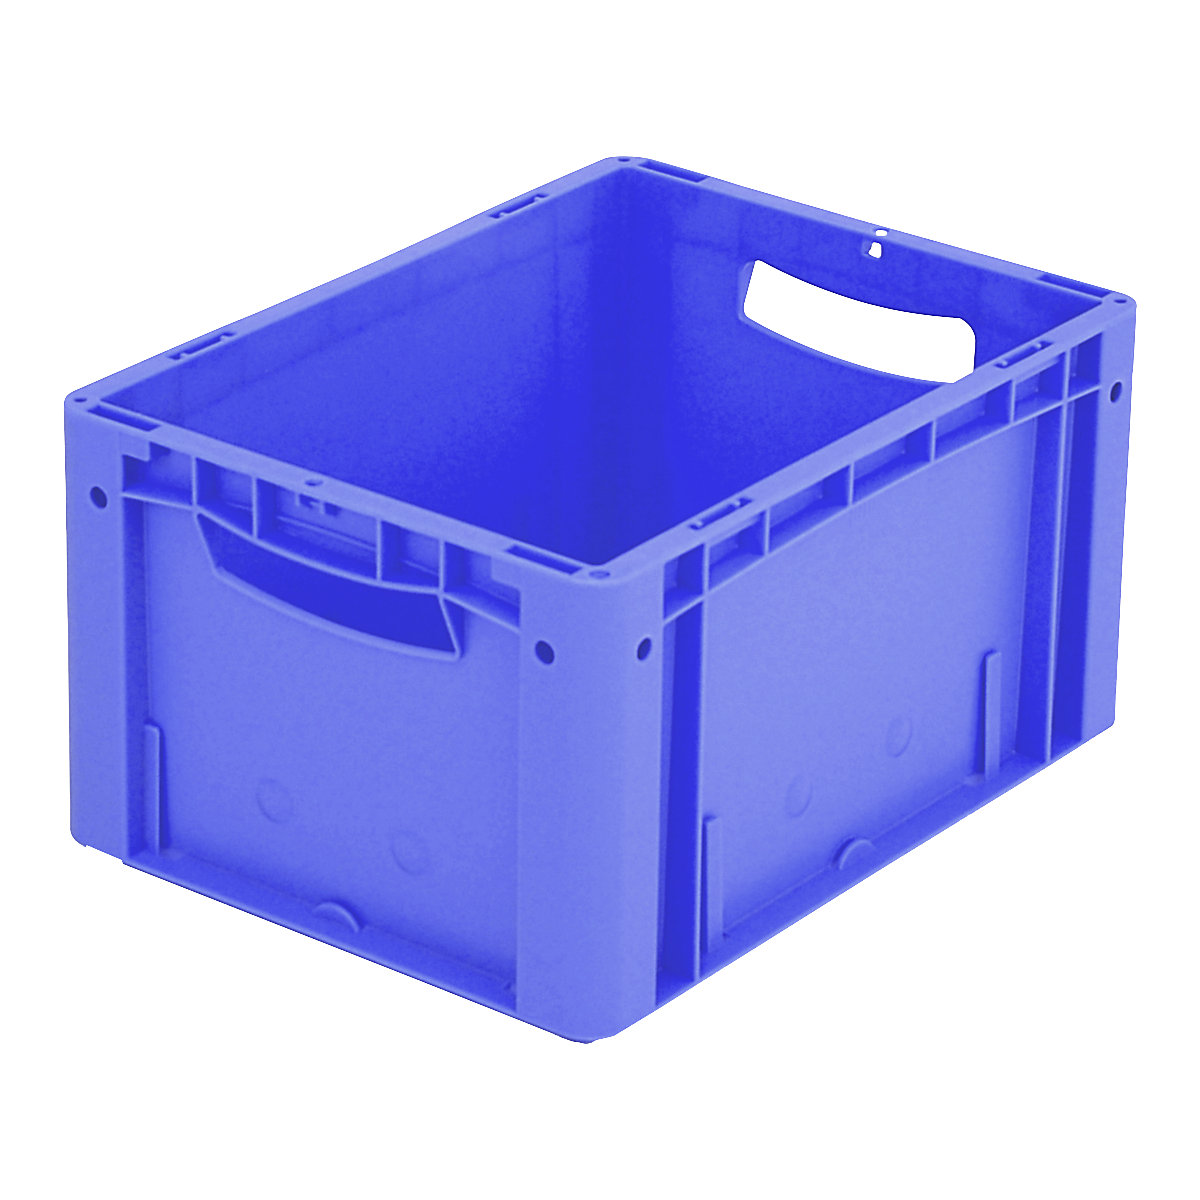 XL Euro stacking container – BITO, standard model, LxWxH 400 x 300 x 220 mm-18